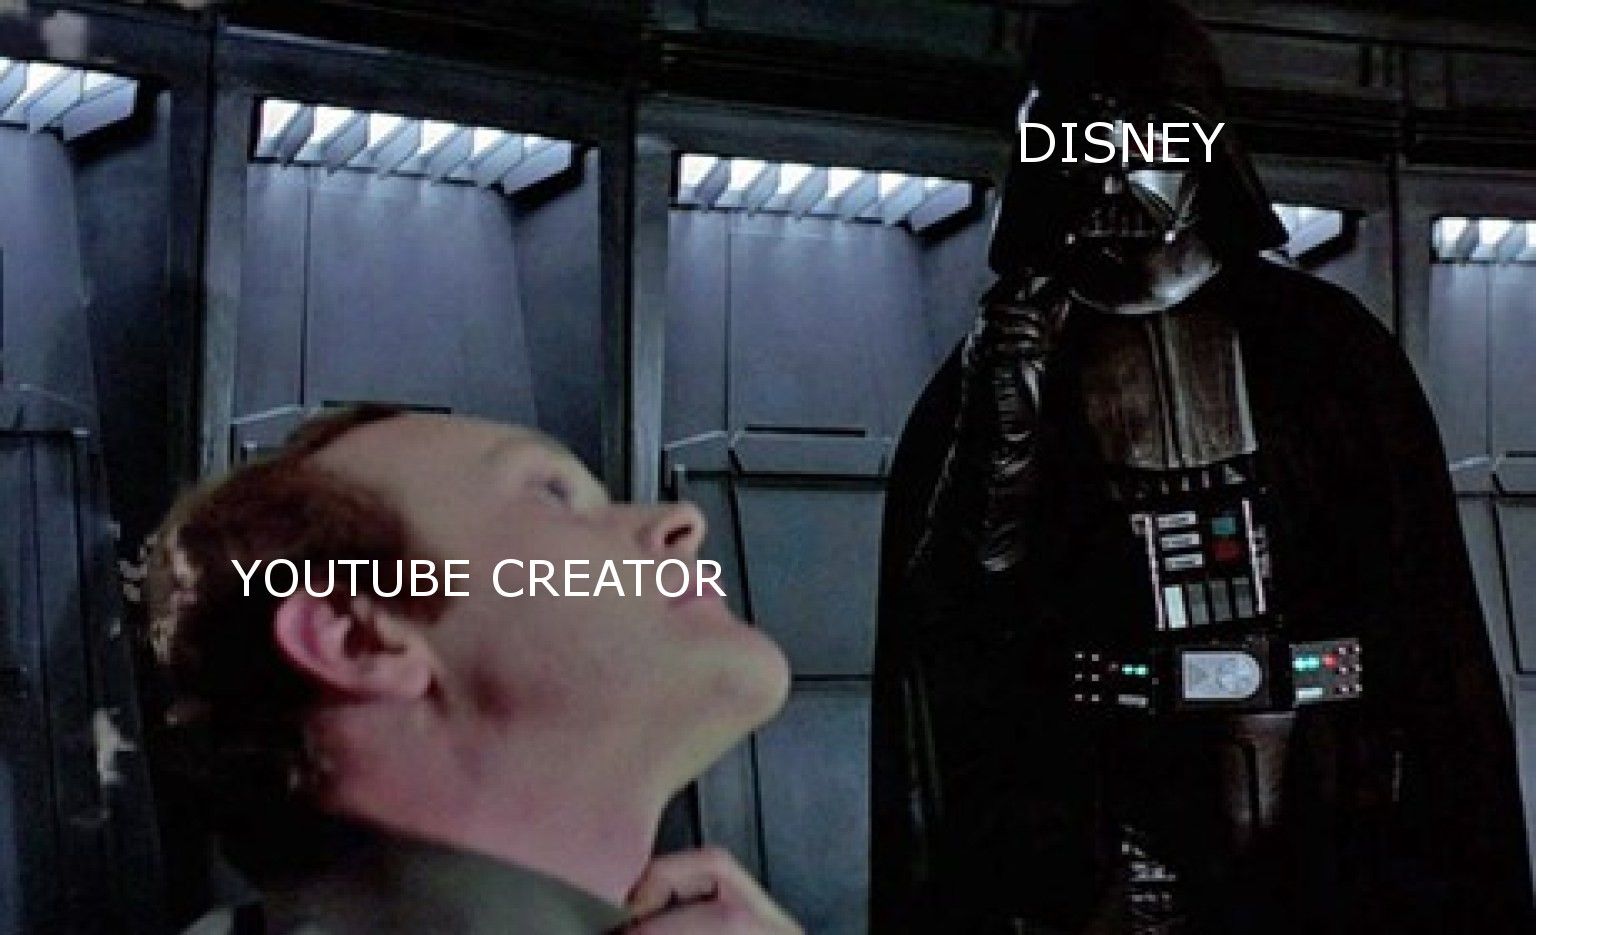 Disney claims profits from Vader fan film